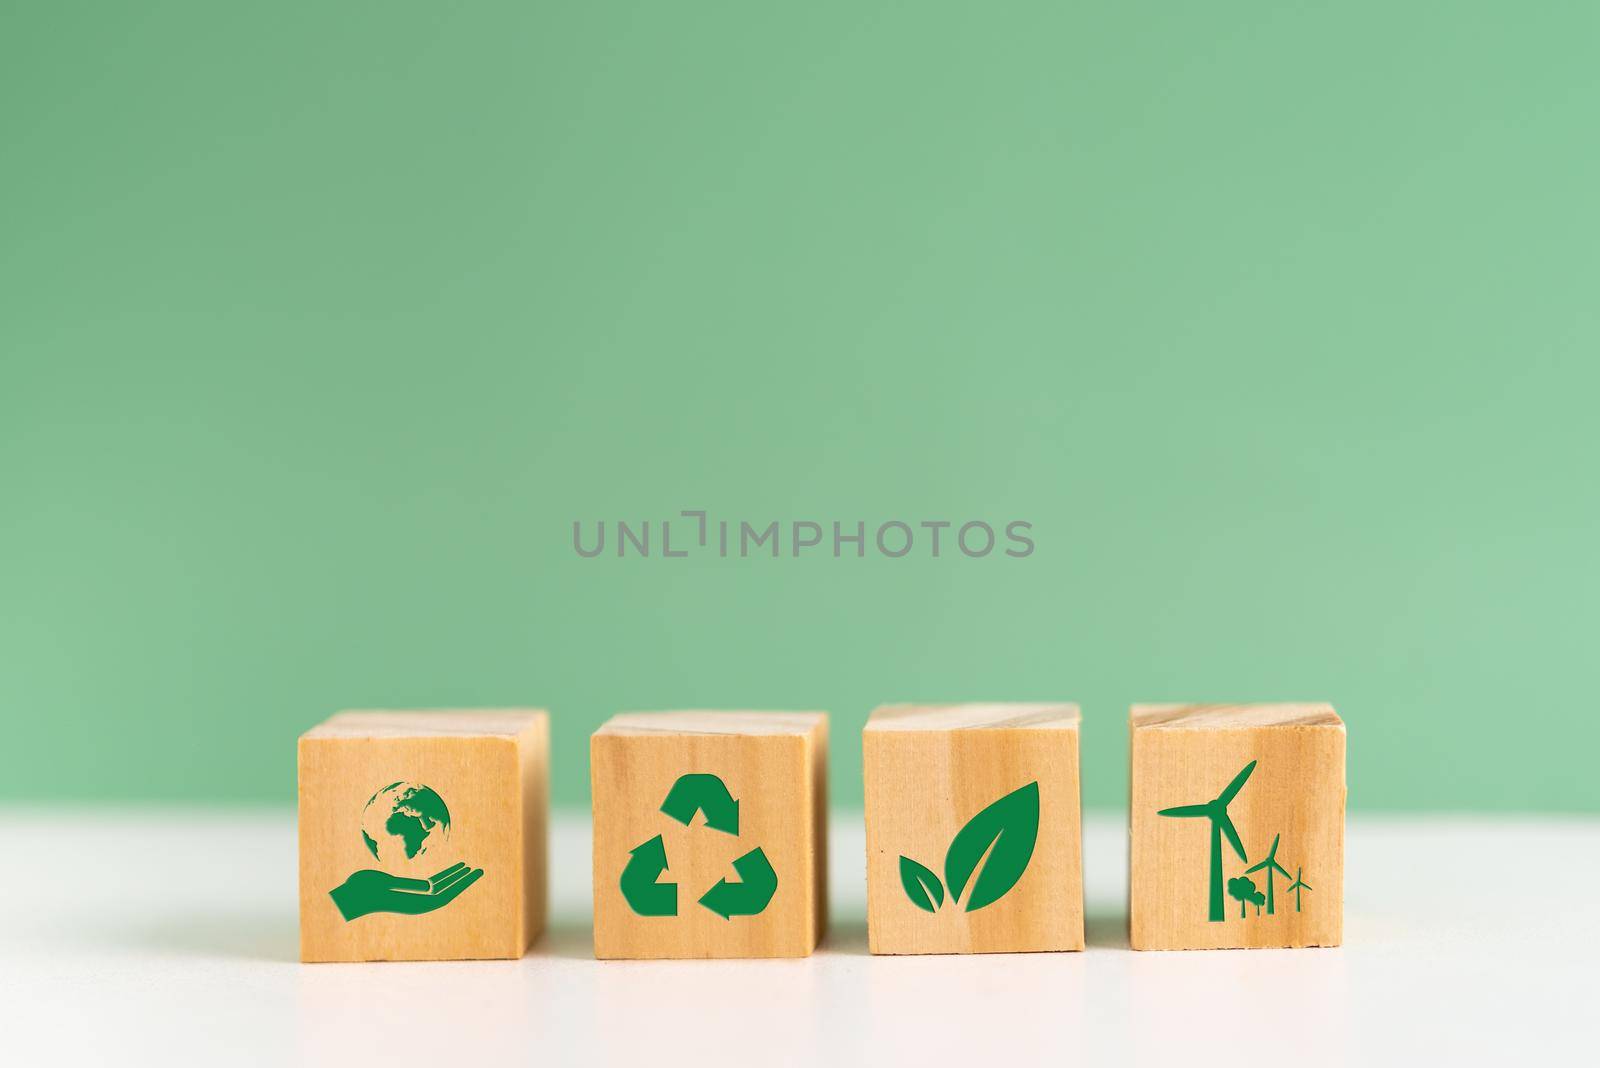 Wood cube block Esg Environmental Social and Governance eco concept of sustainable development of the organization.Investing and management of pollution to reduce global warming.